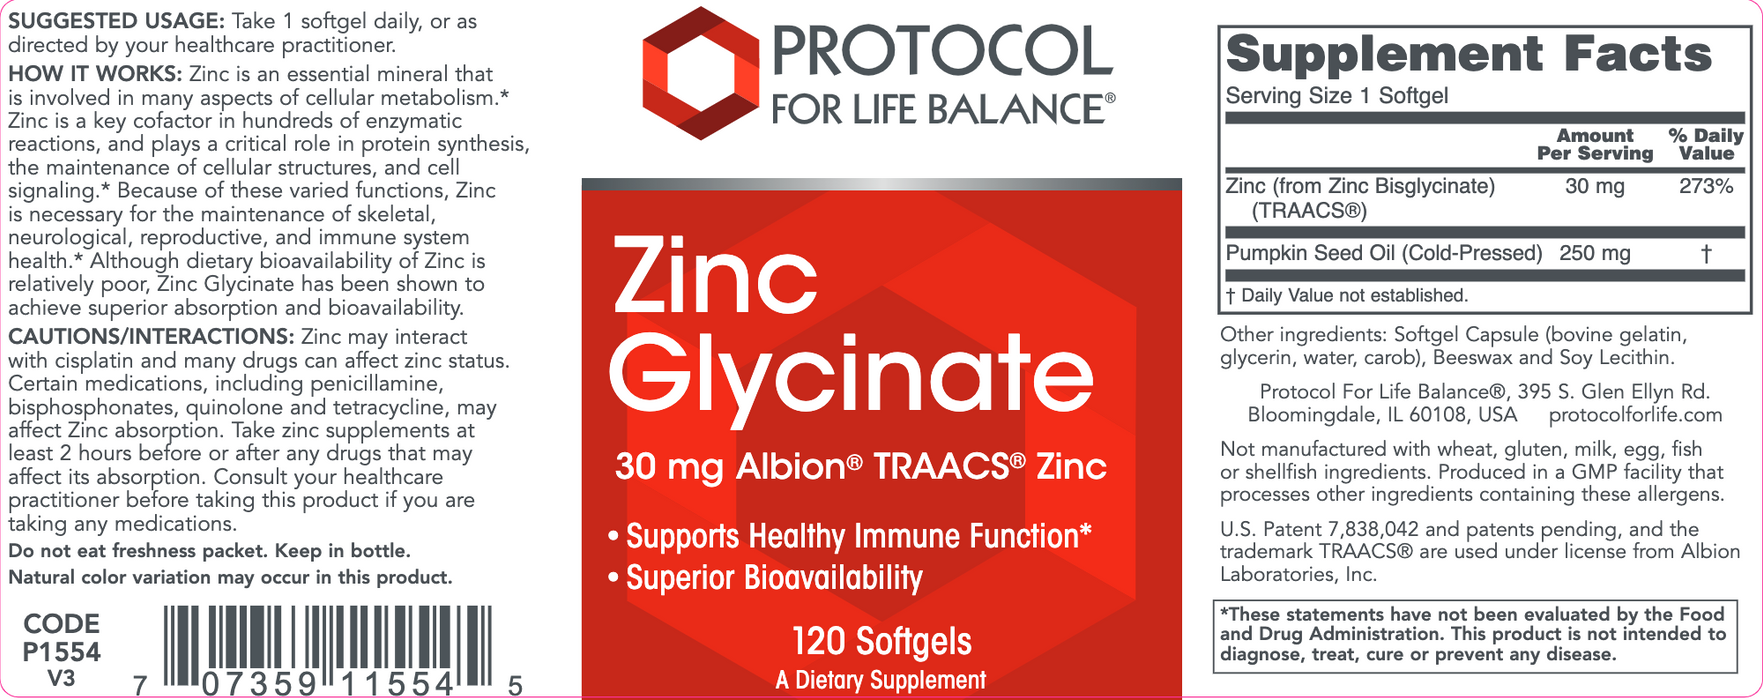 Zinc Glycinate (120 Softgels)-Vitamins & Supplements-Protocol For Life Balance-Pine Street Clinic